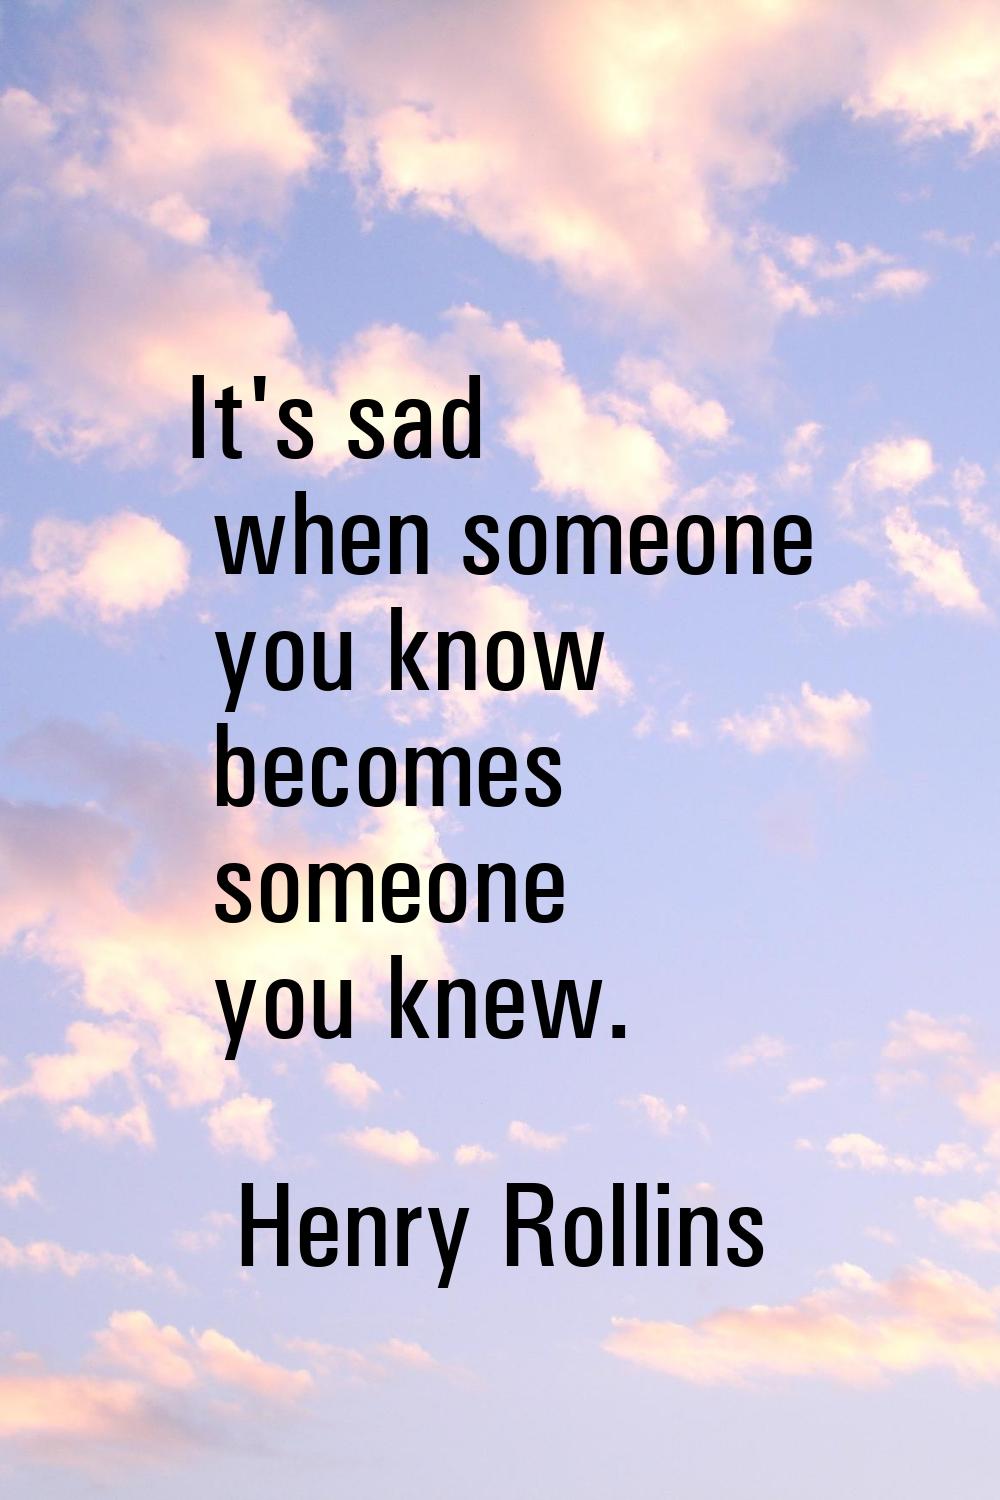 It's sad when someone you know becomes someone you knew.